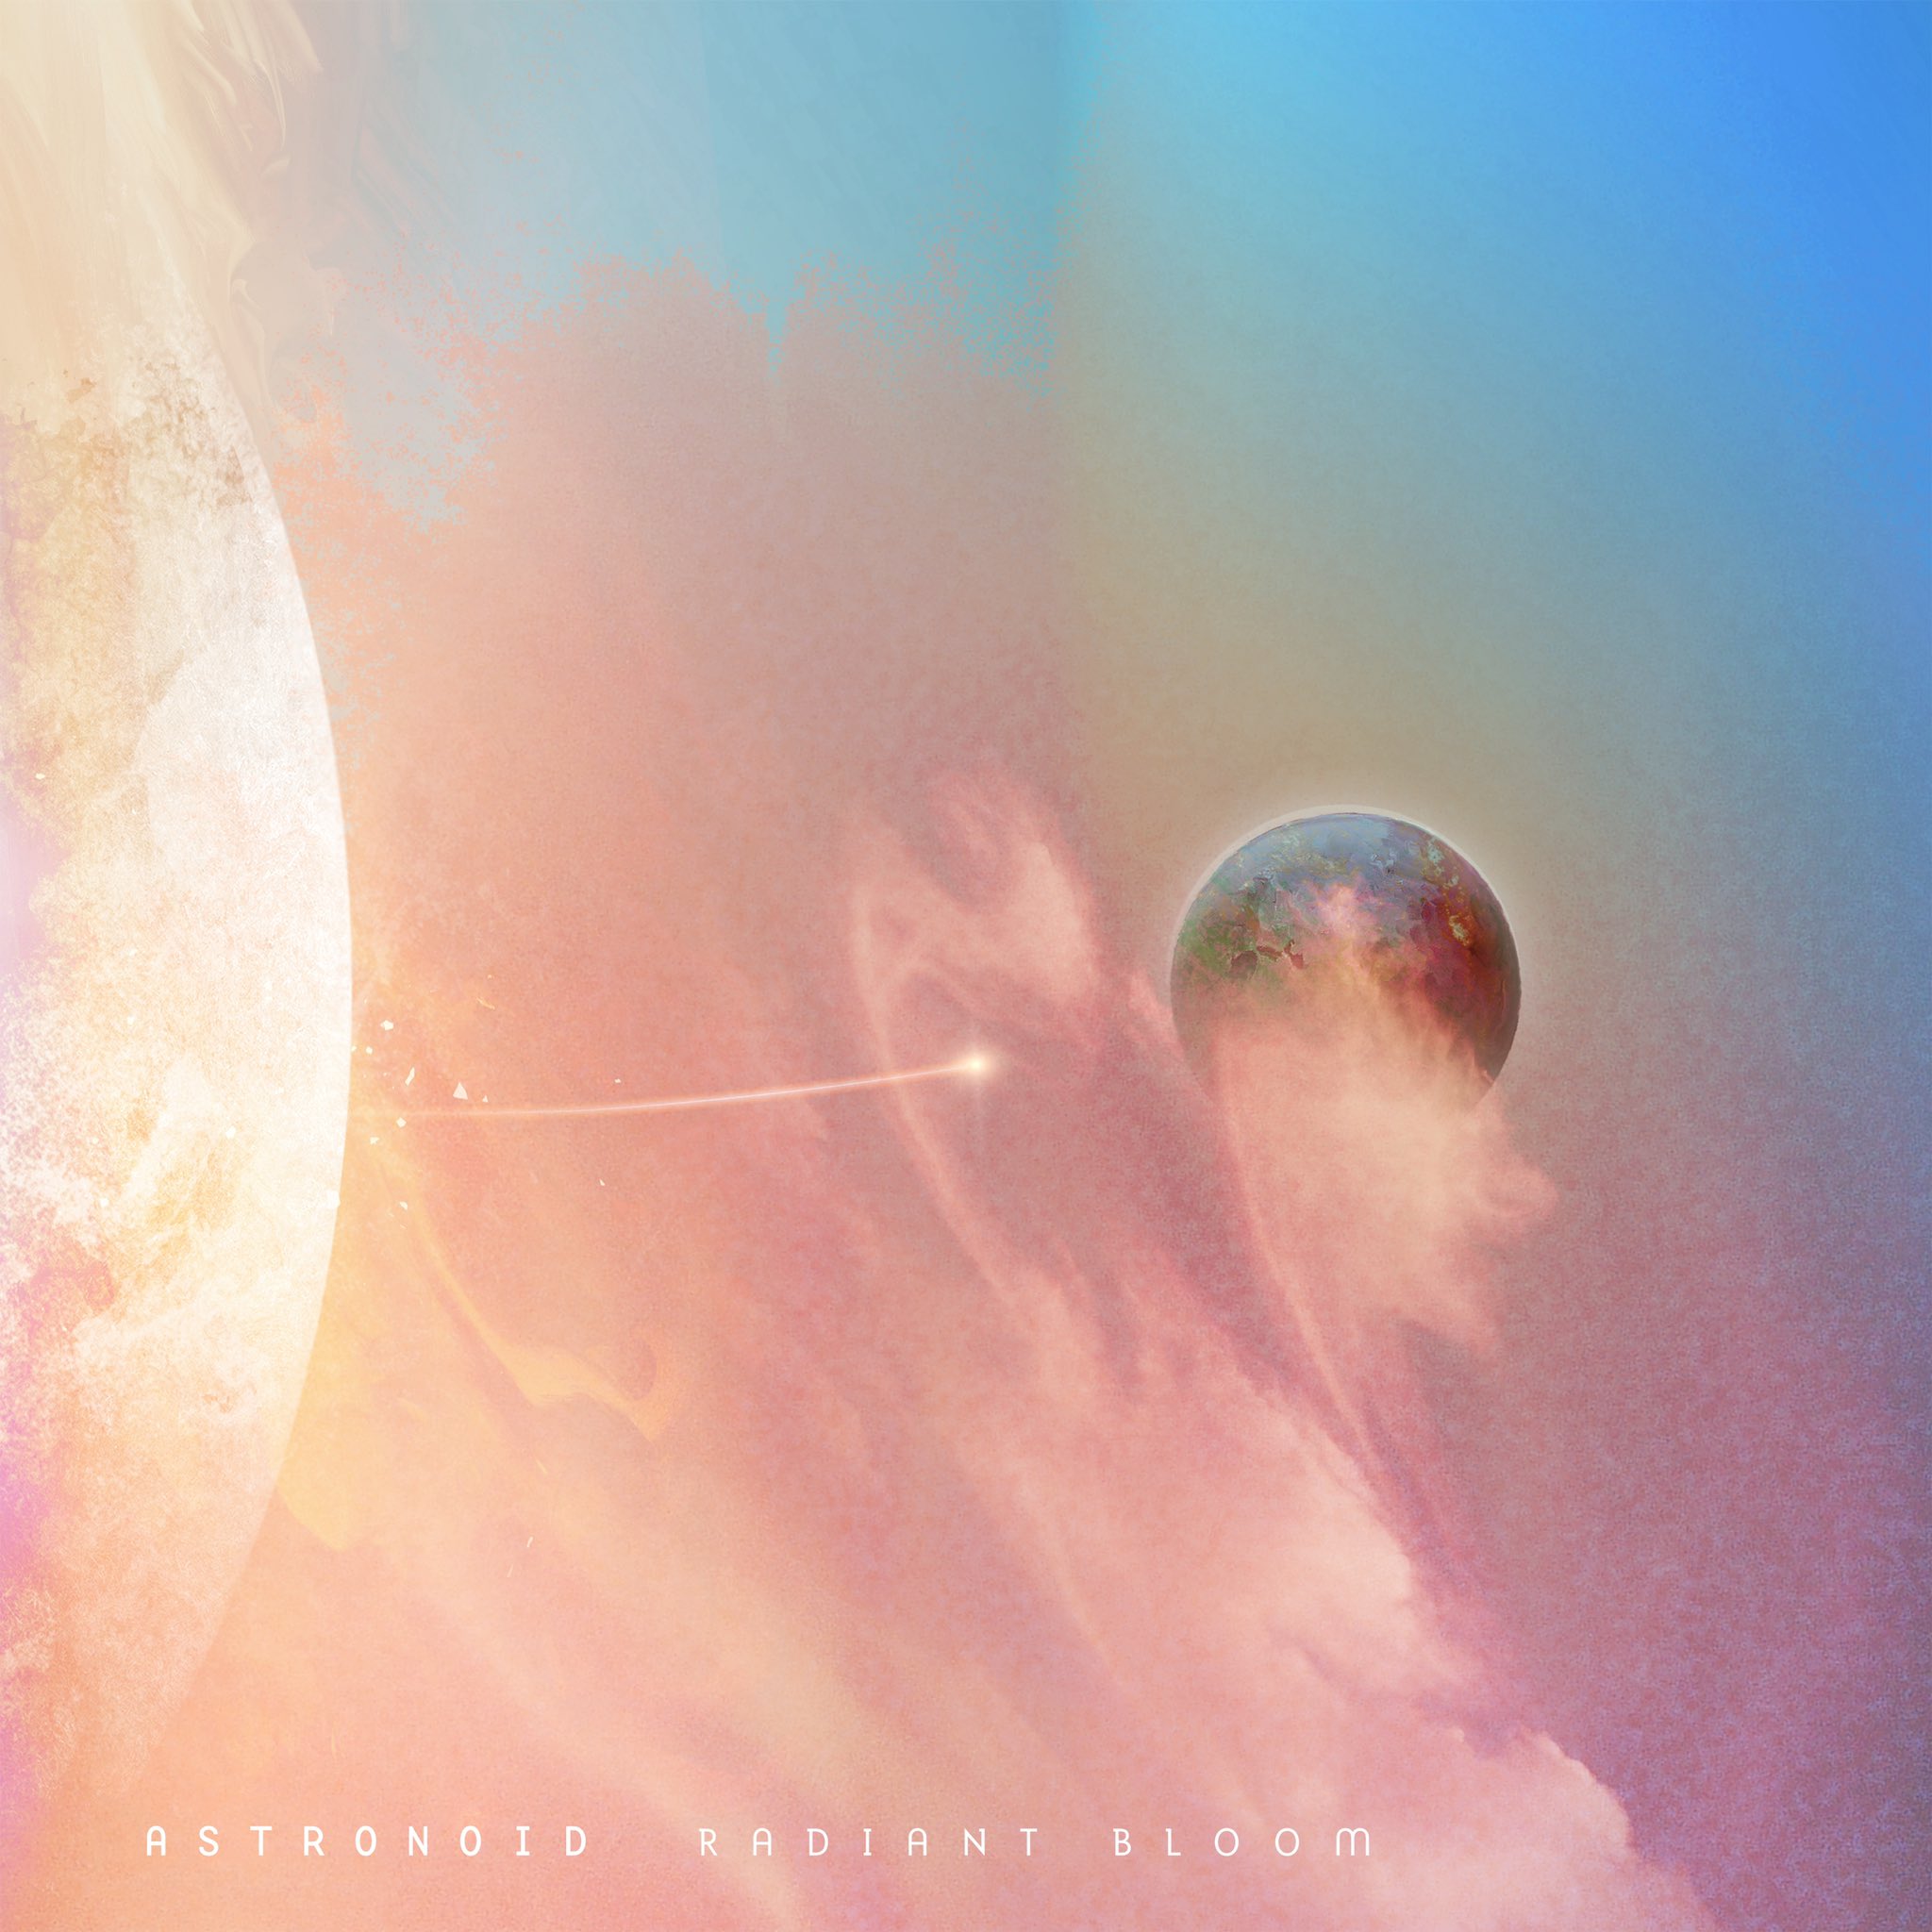 Astronoid — Radiant Bloom cover artwork